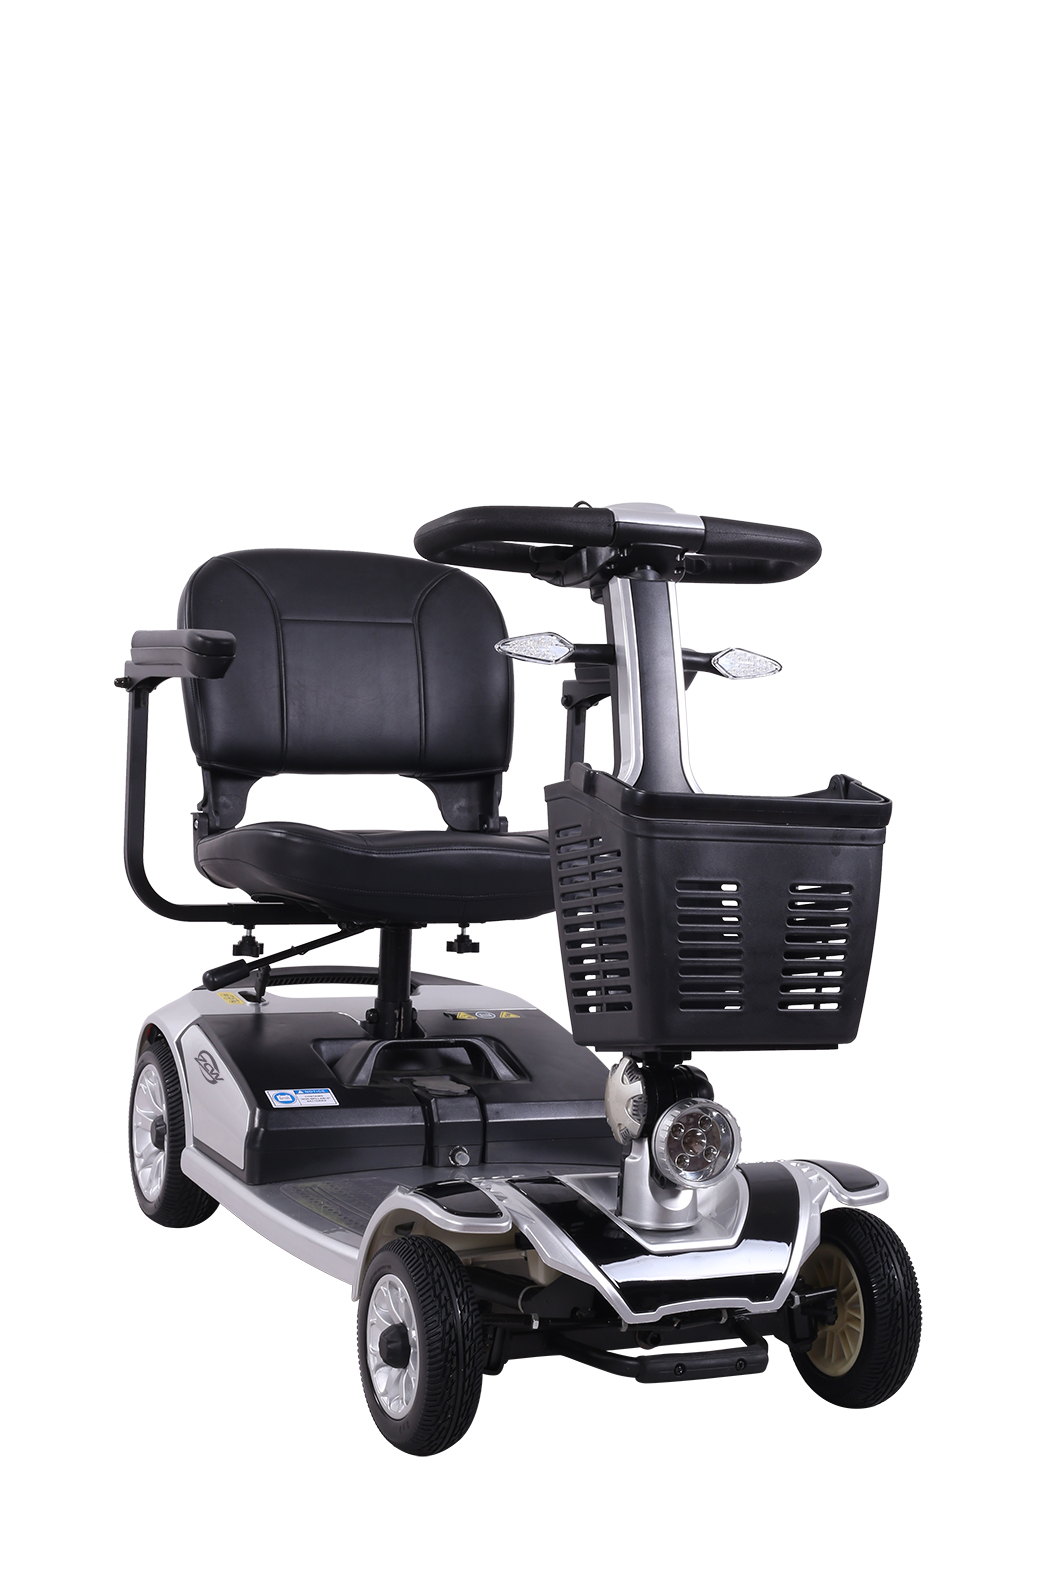 24V / 250W ELDERLY DISABILITY ELECTRIC MOBILITY SCOOTER IN LEAD-ACID BATTERY VERSION (S-01)